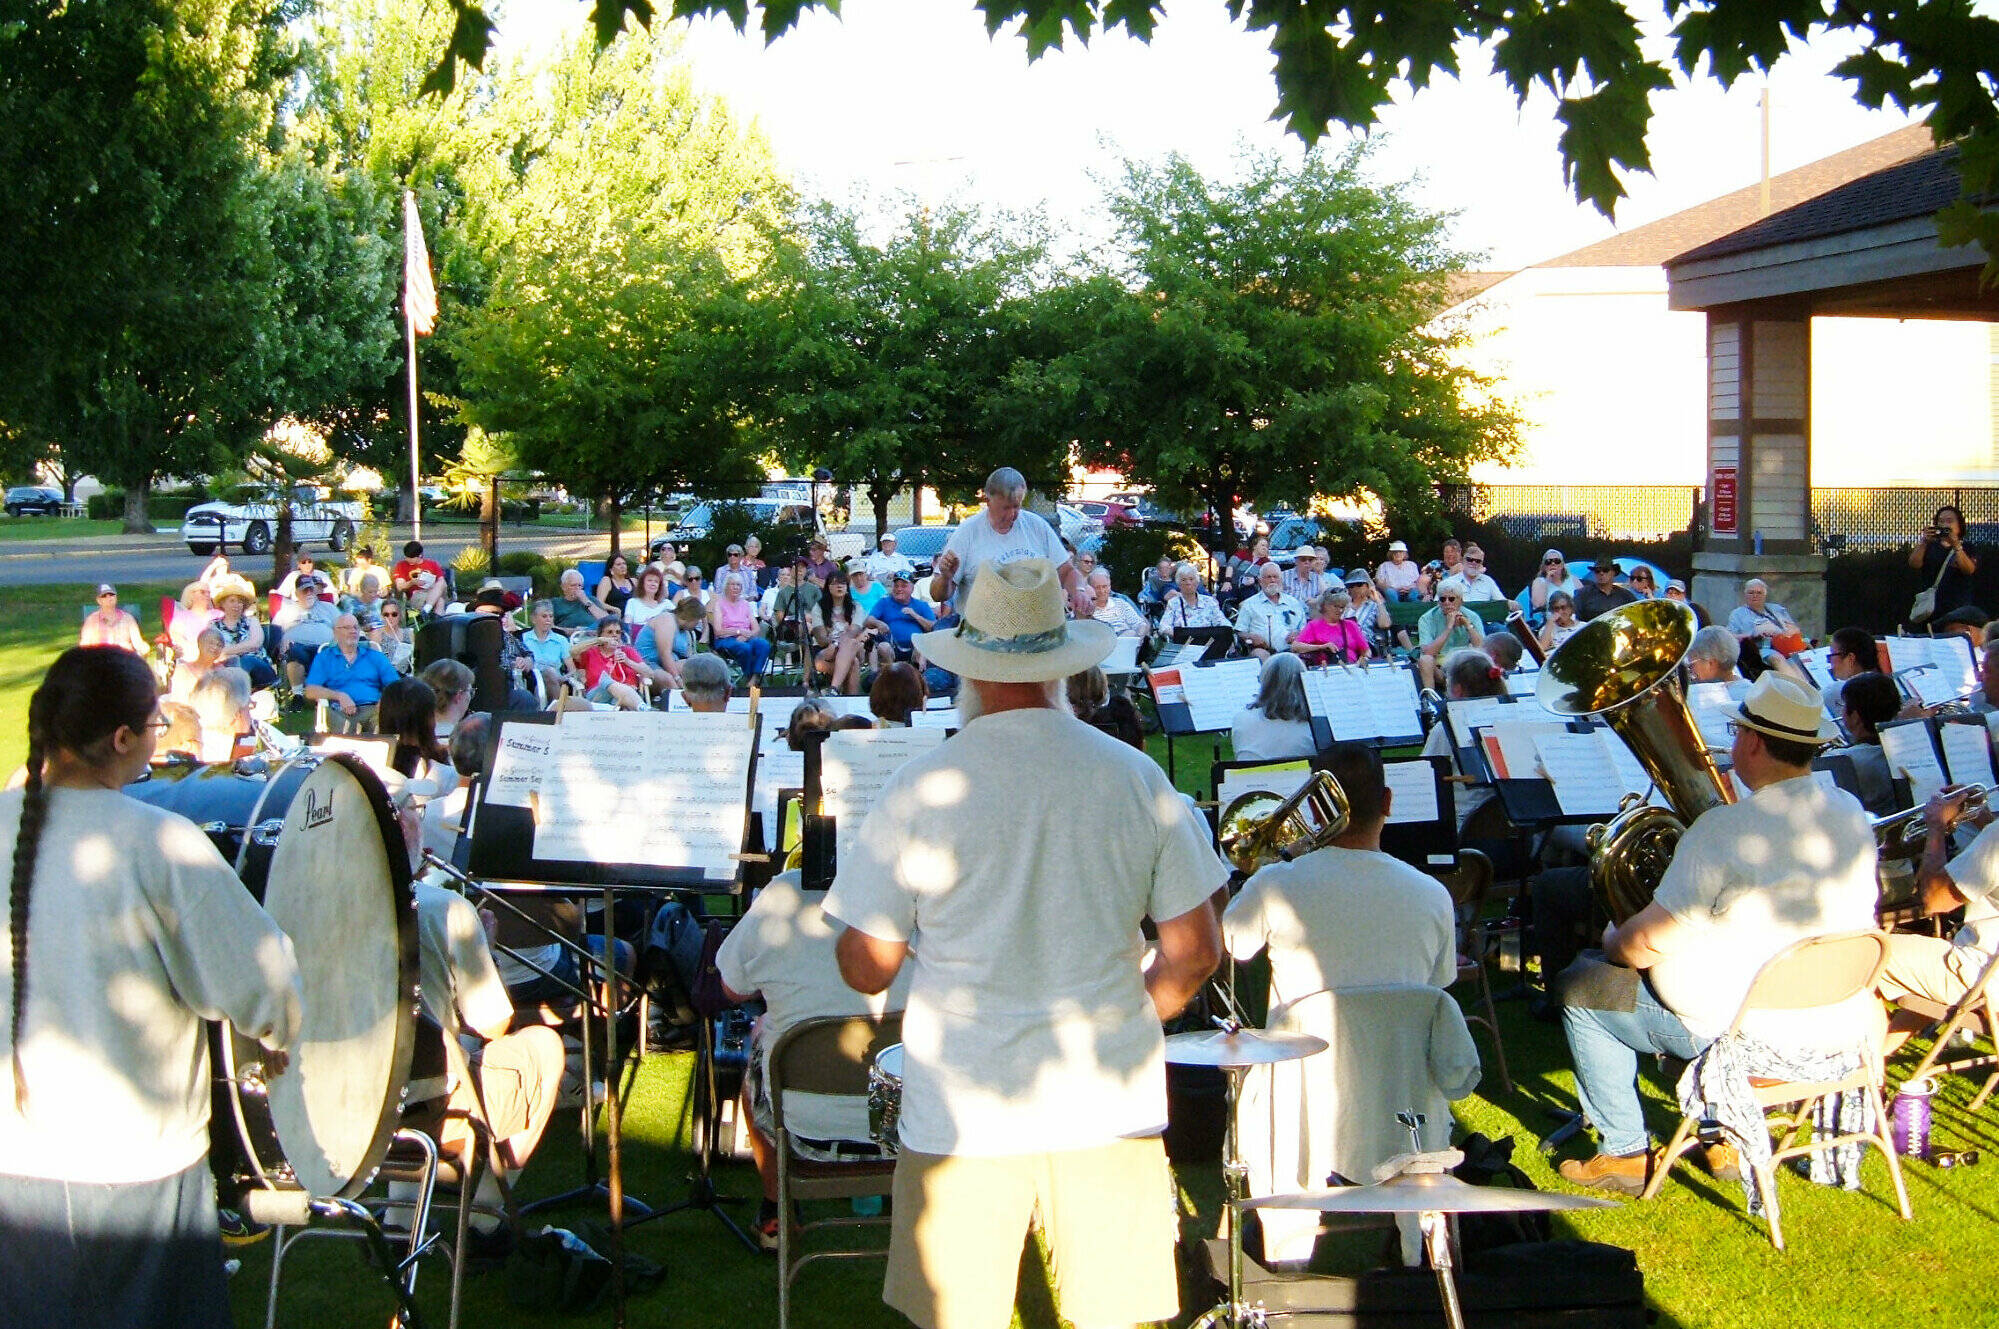 Contributed photo
The Gateway Concert Band played at Enumclaw’s Rotary Park last August for their “Summer Sojourn” concert.